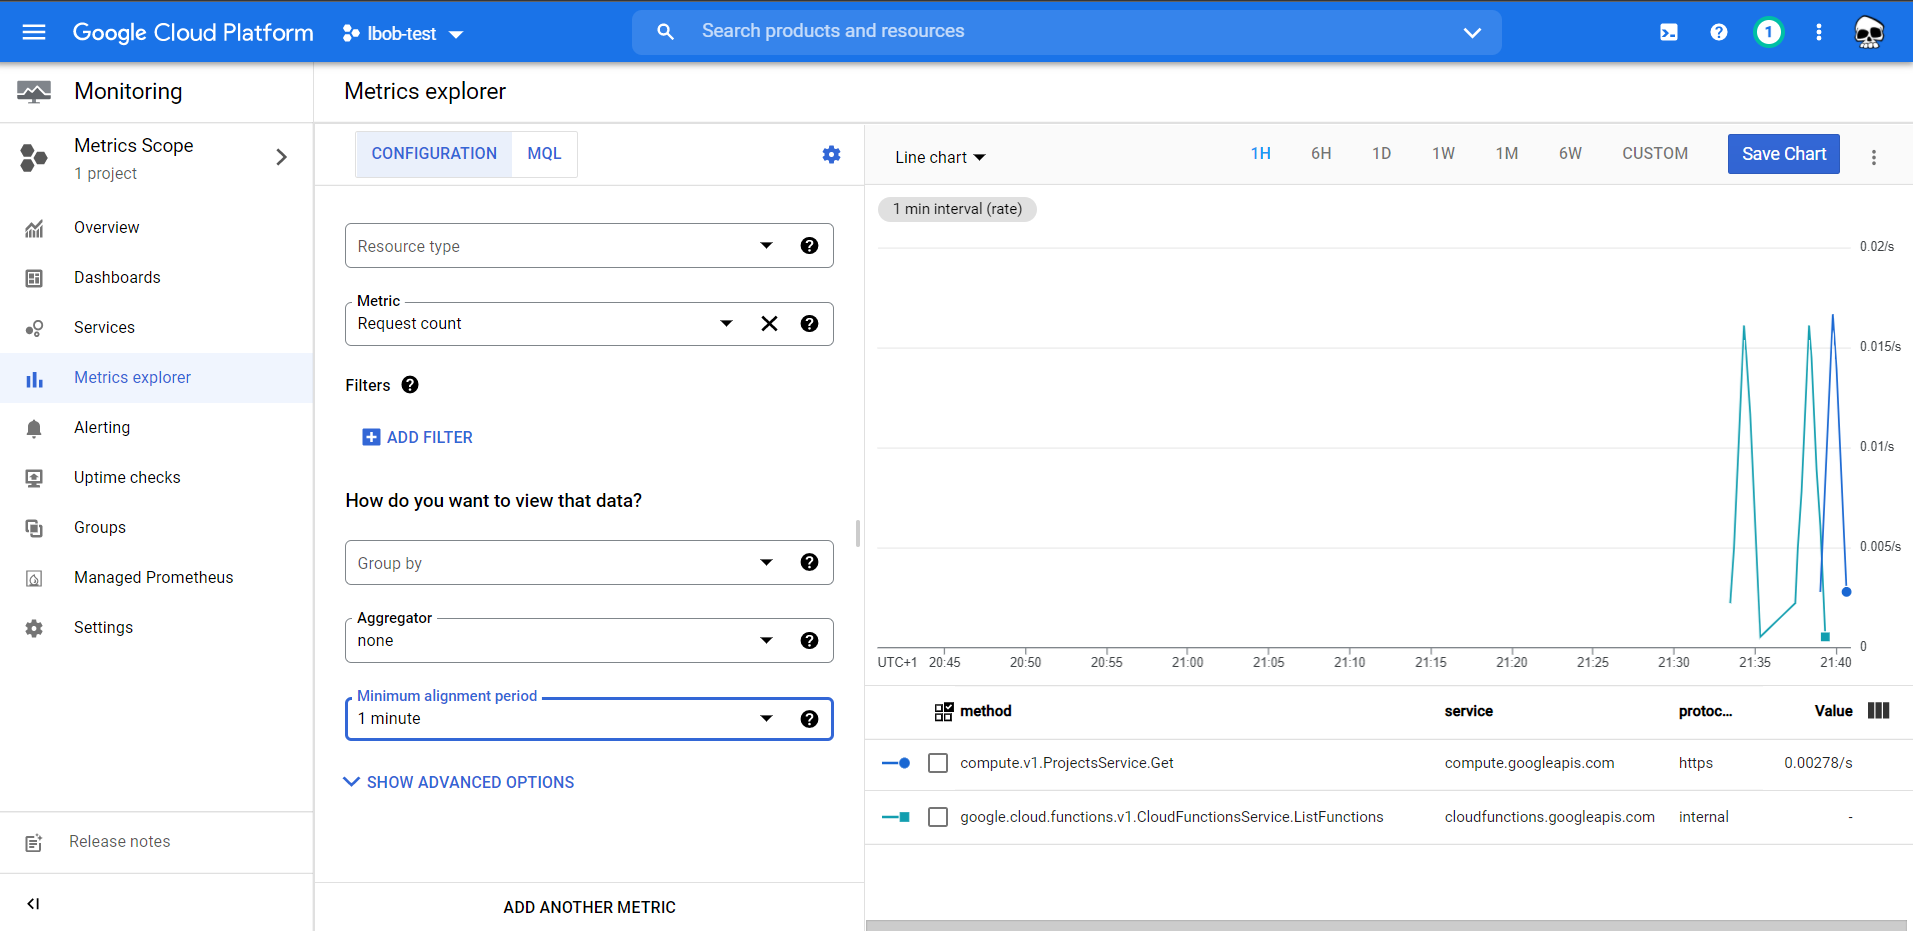 Application Observability in GCP with OpenTelemetry and the Google Cloud Operations Suite (formerly Stackdriver)